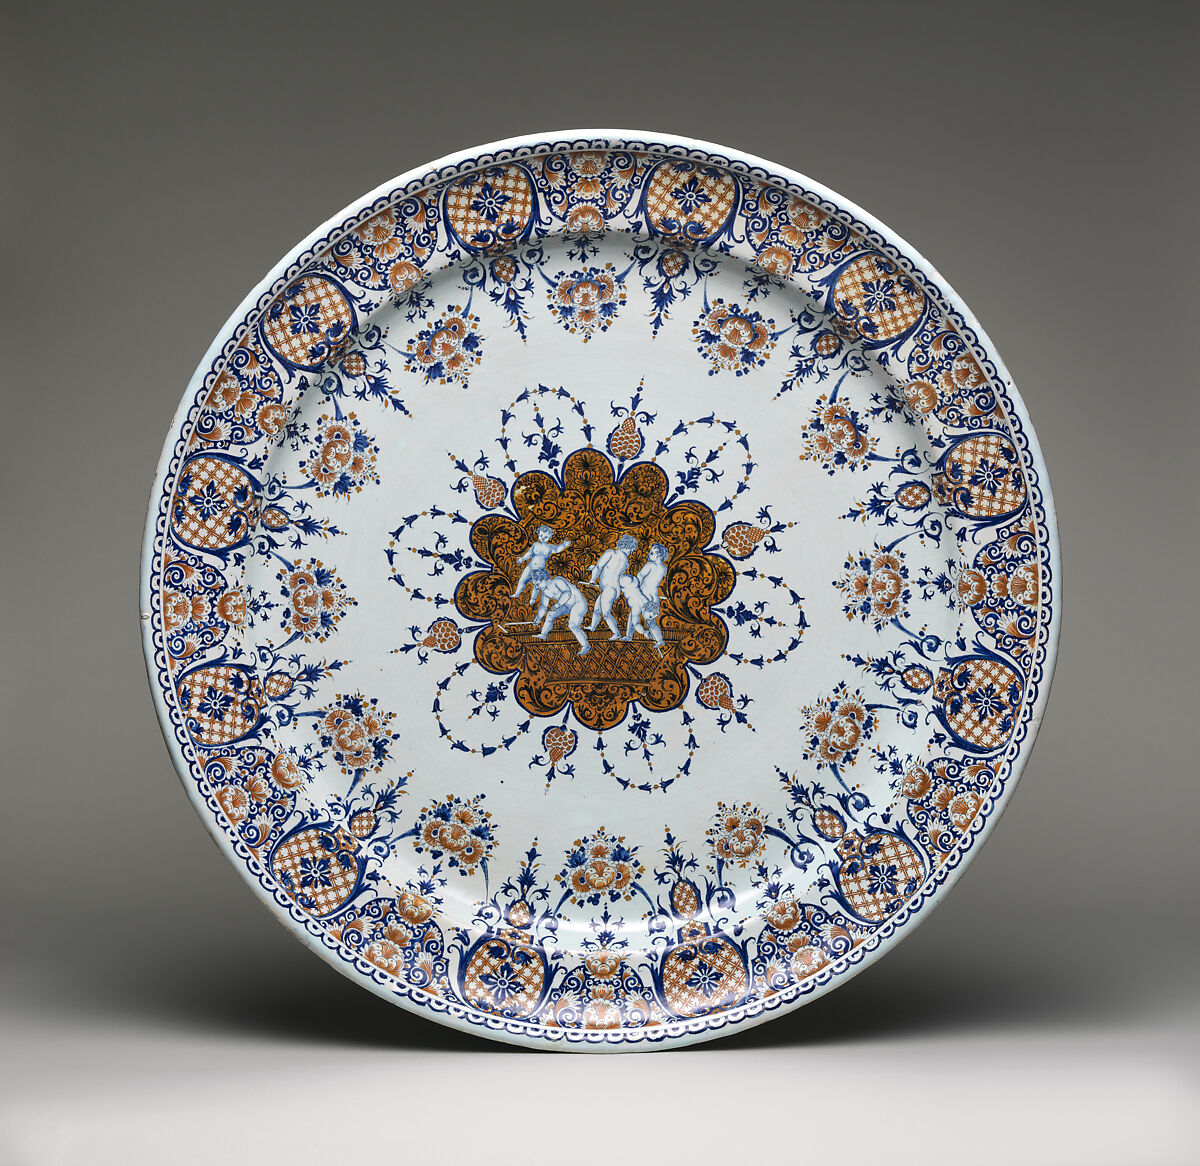 Plateau, After a design by Jacques Stella (French, Lyons 1596–1657 Paris), Faience (tin-glazed earthenware), French, Rouen 